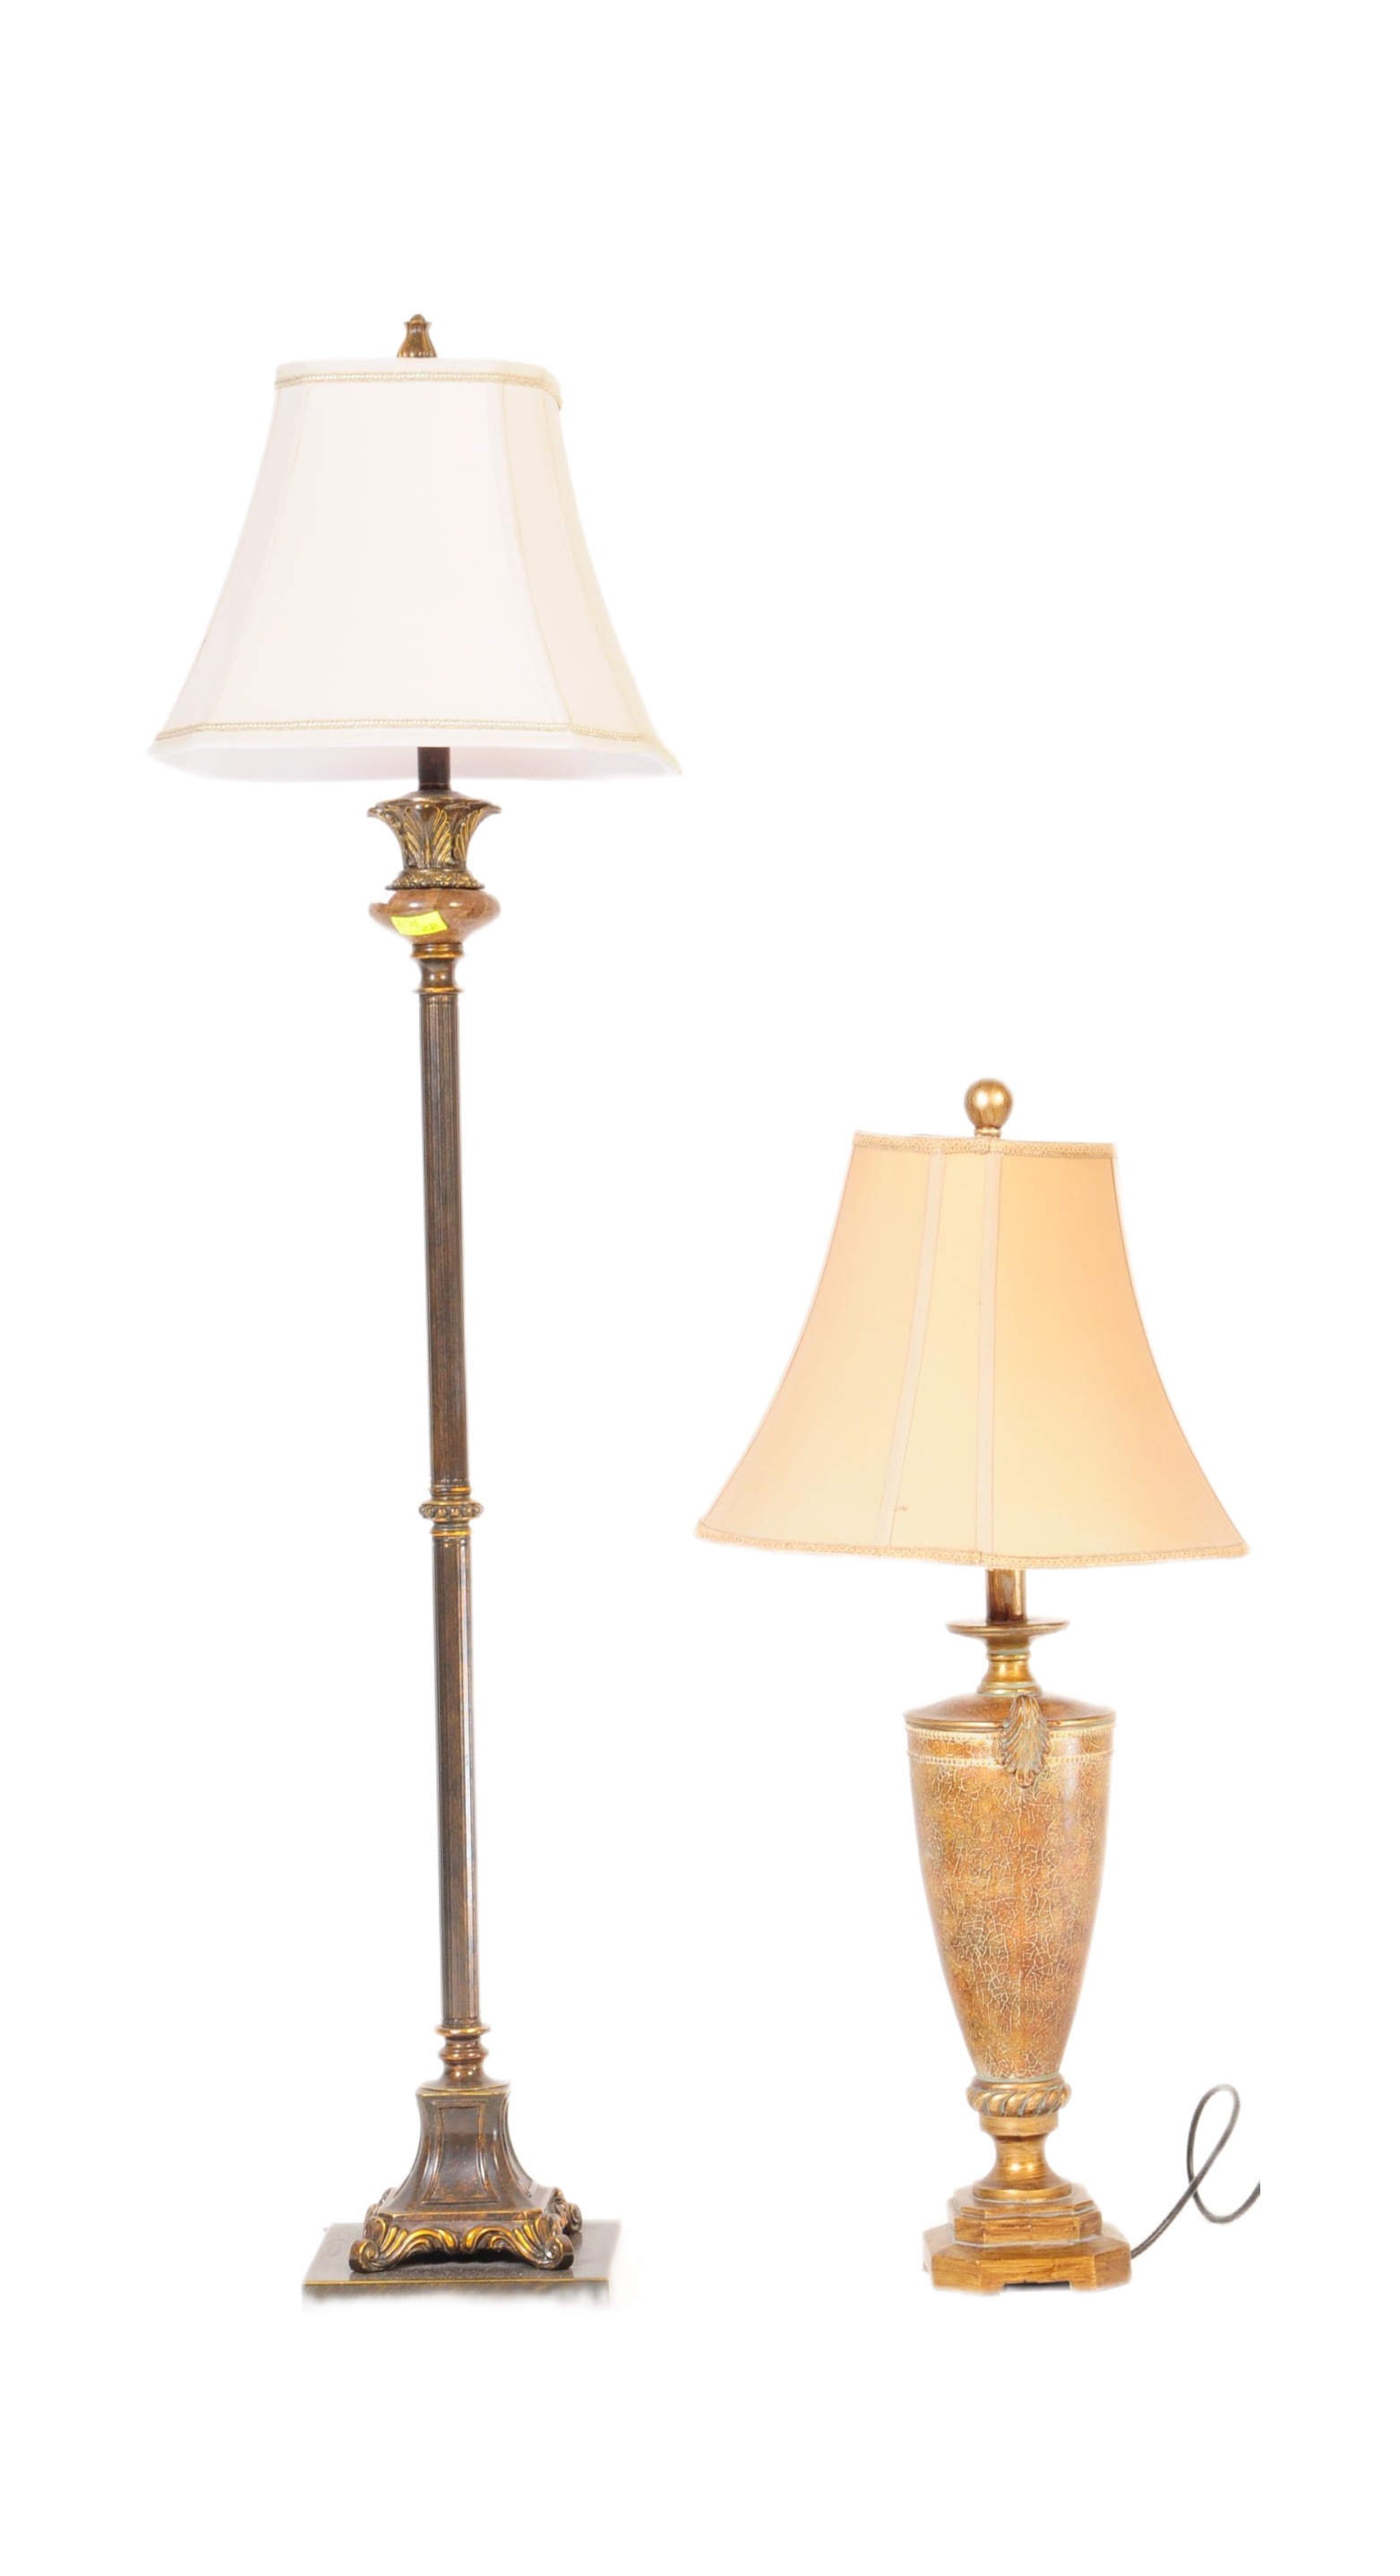 A PAIR OF 20TH CENTURY REGENCY STYLE FLOOR AND TABLE LAMPS